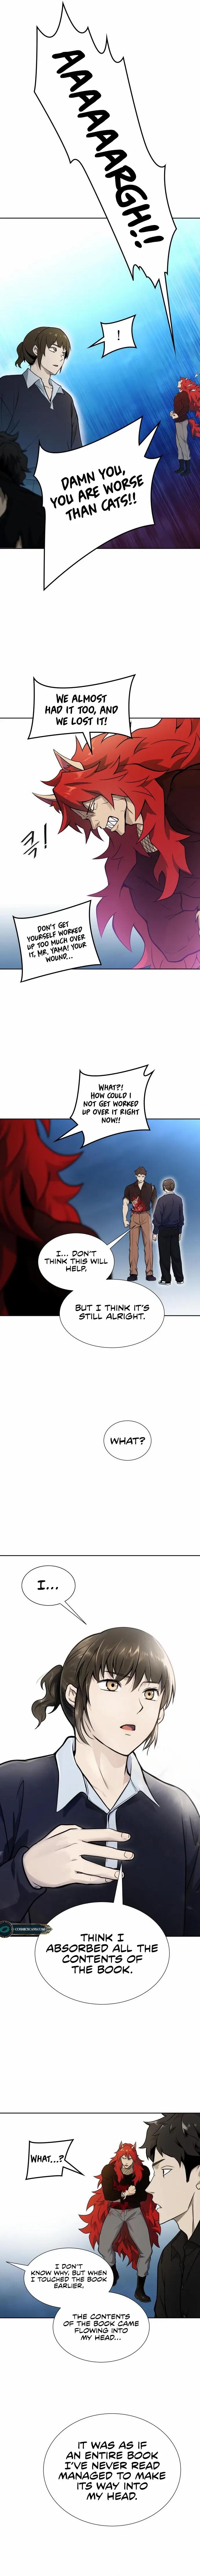 Tower Of God Chapter 589 Read Tower Of God Chapter 589 - Manganelo